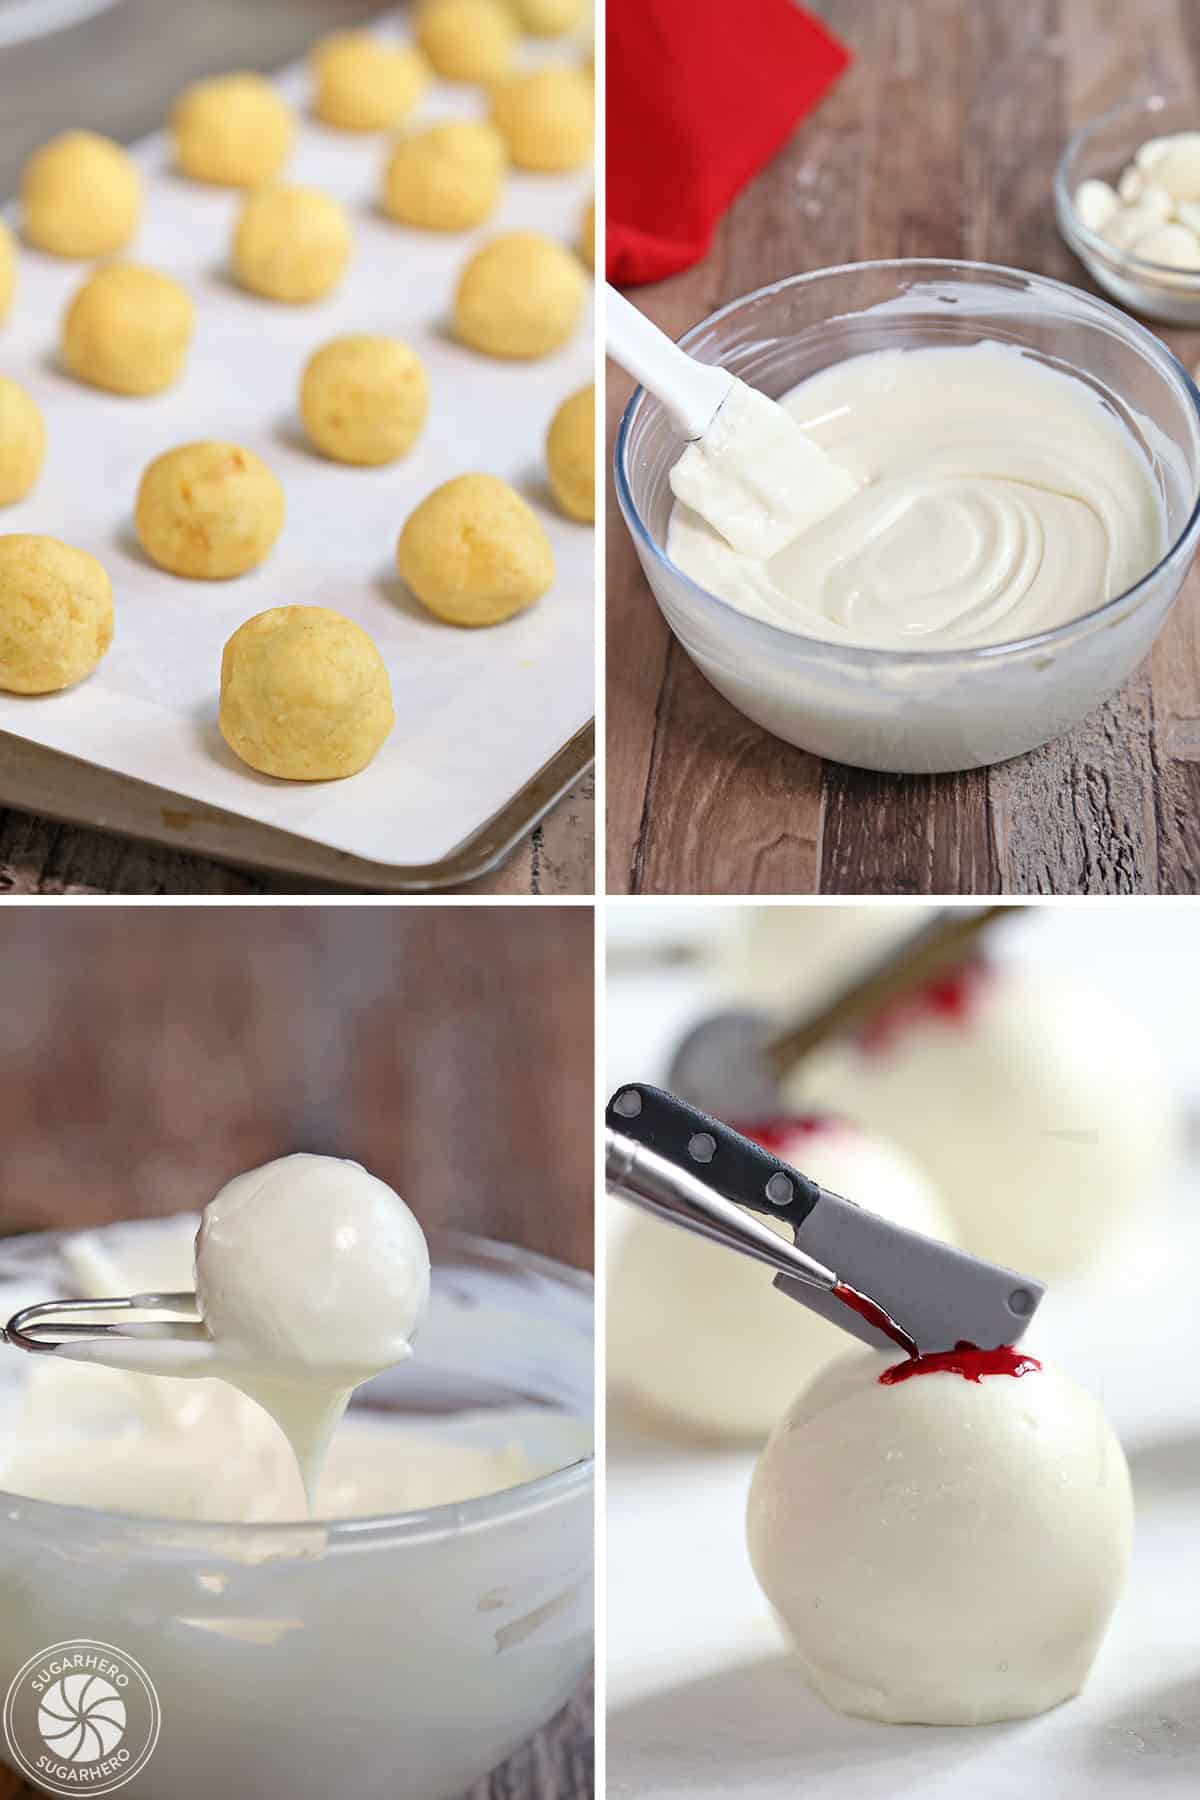 Four photo collage showing how to dip and decorate Halloween Cake Balls.